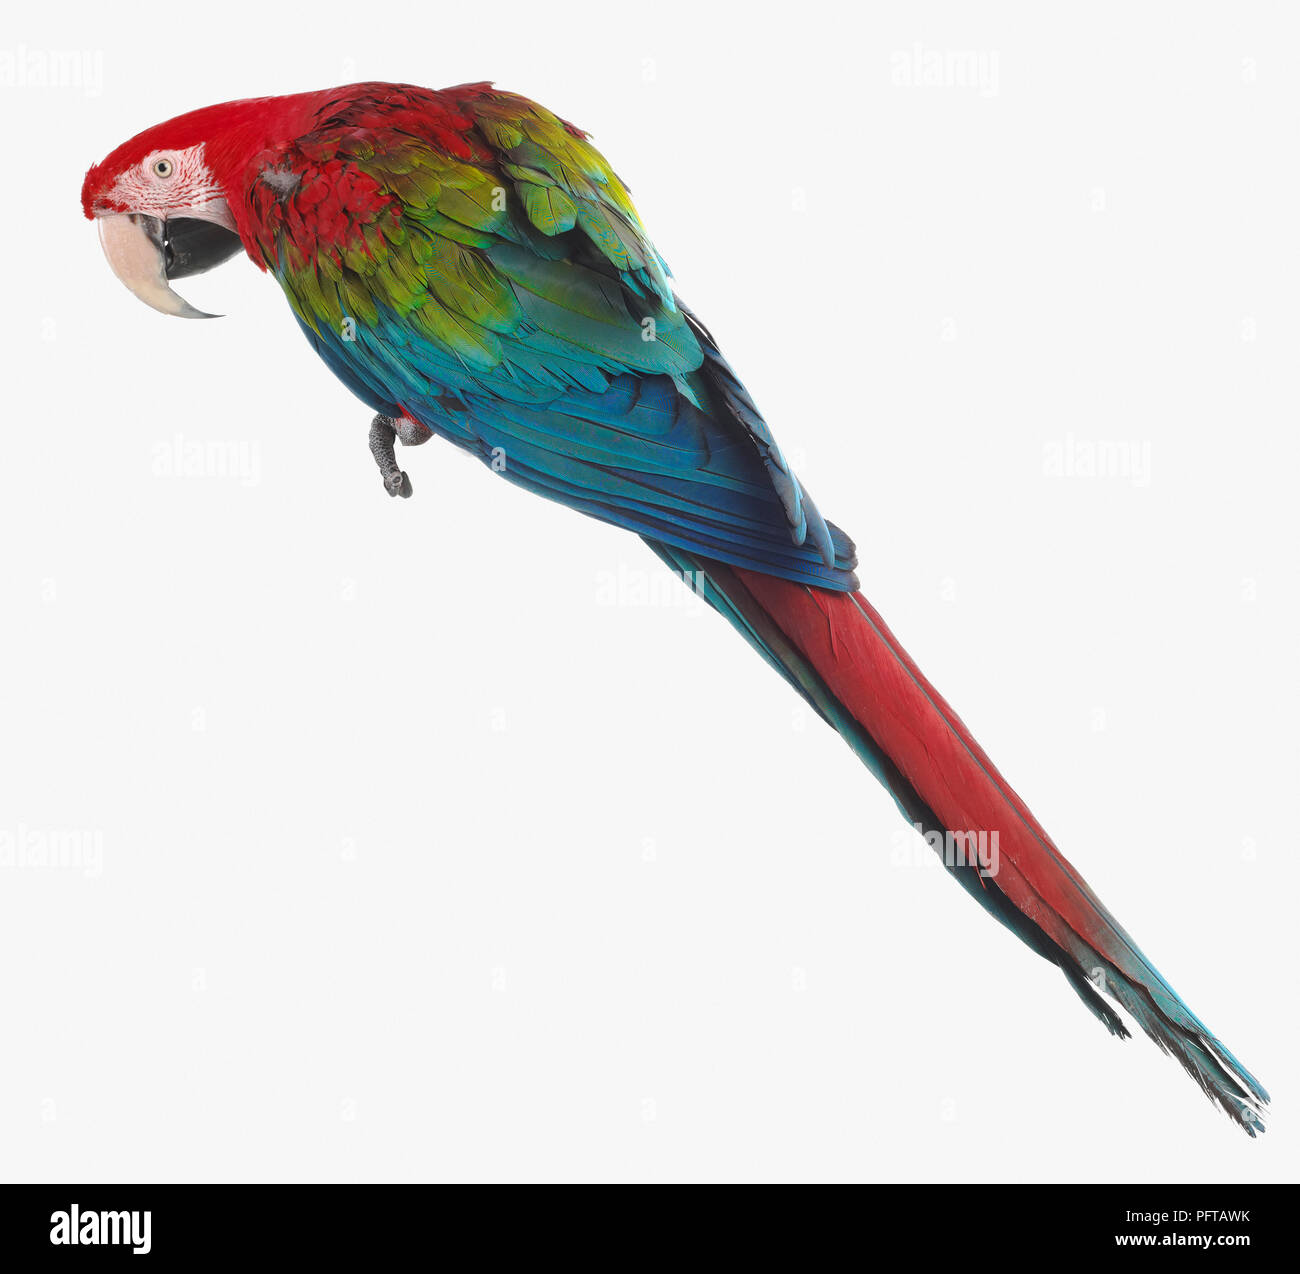 Verde-winged Macaw, rosso-verde Macaw (Ara chloropterus), Parrot Foto Stock